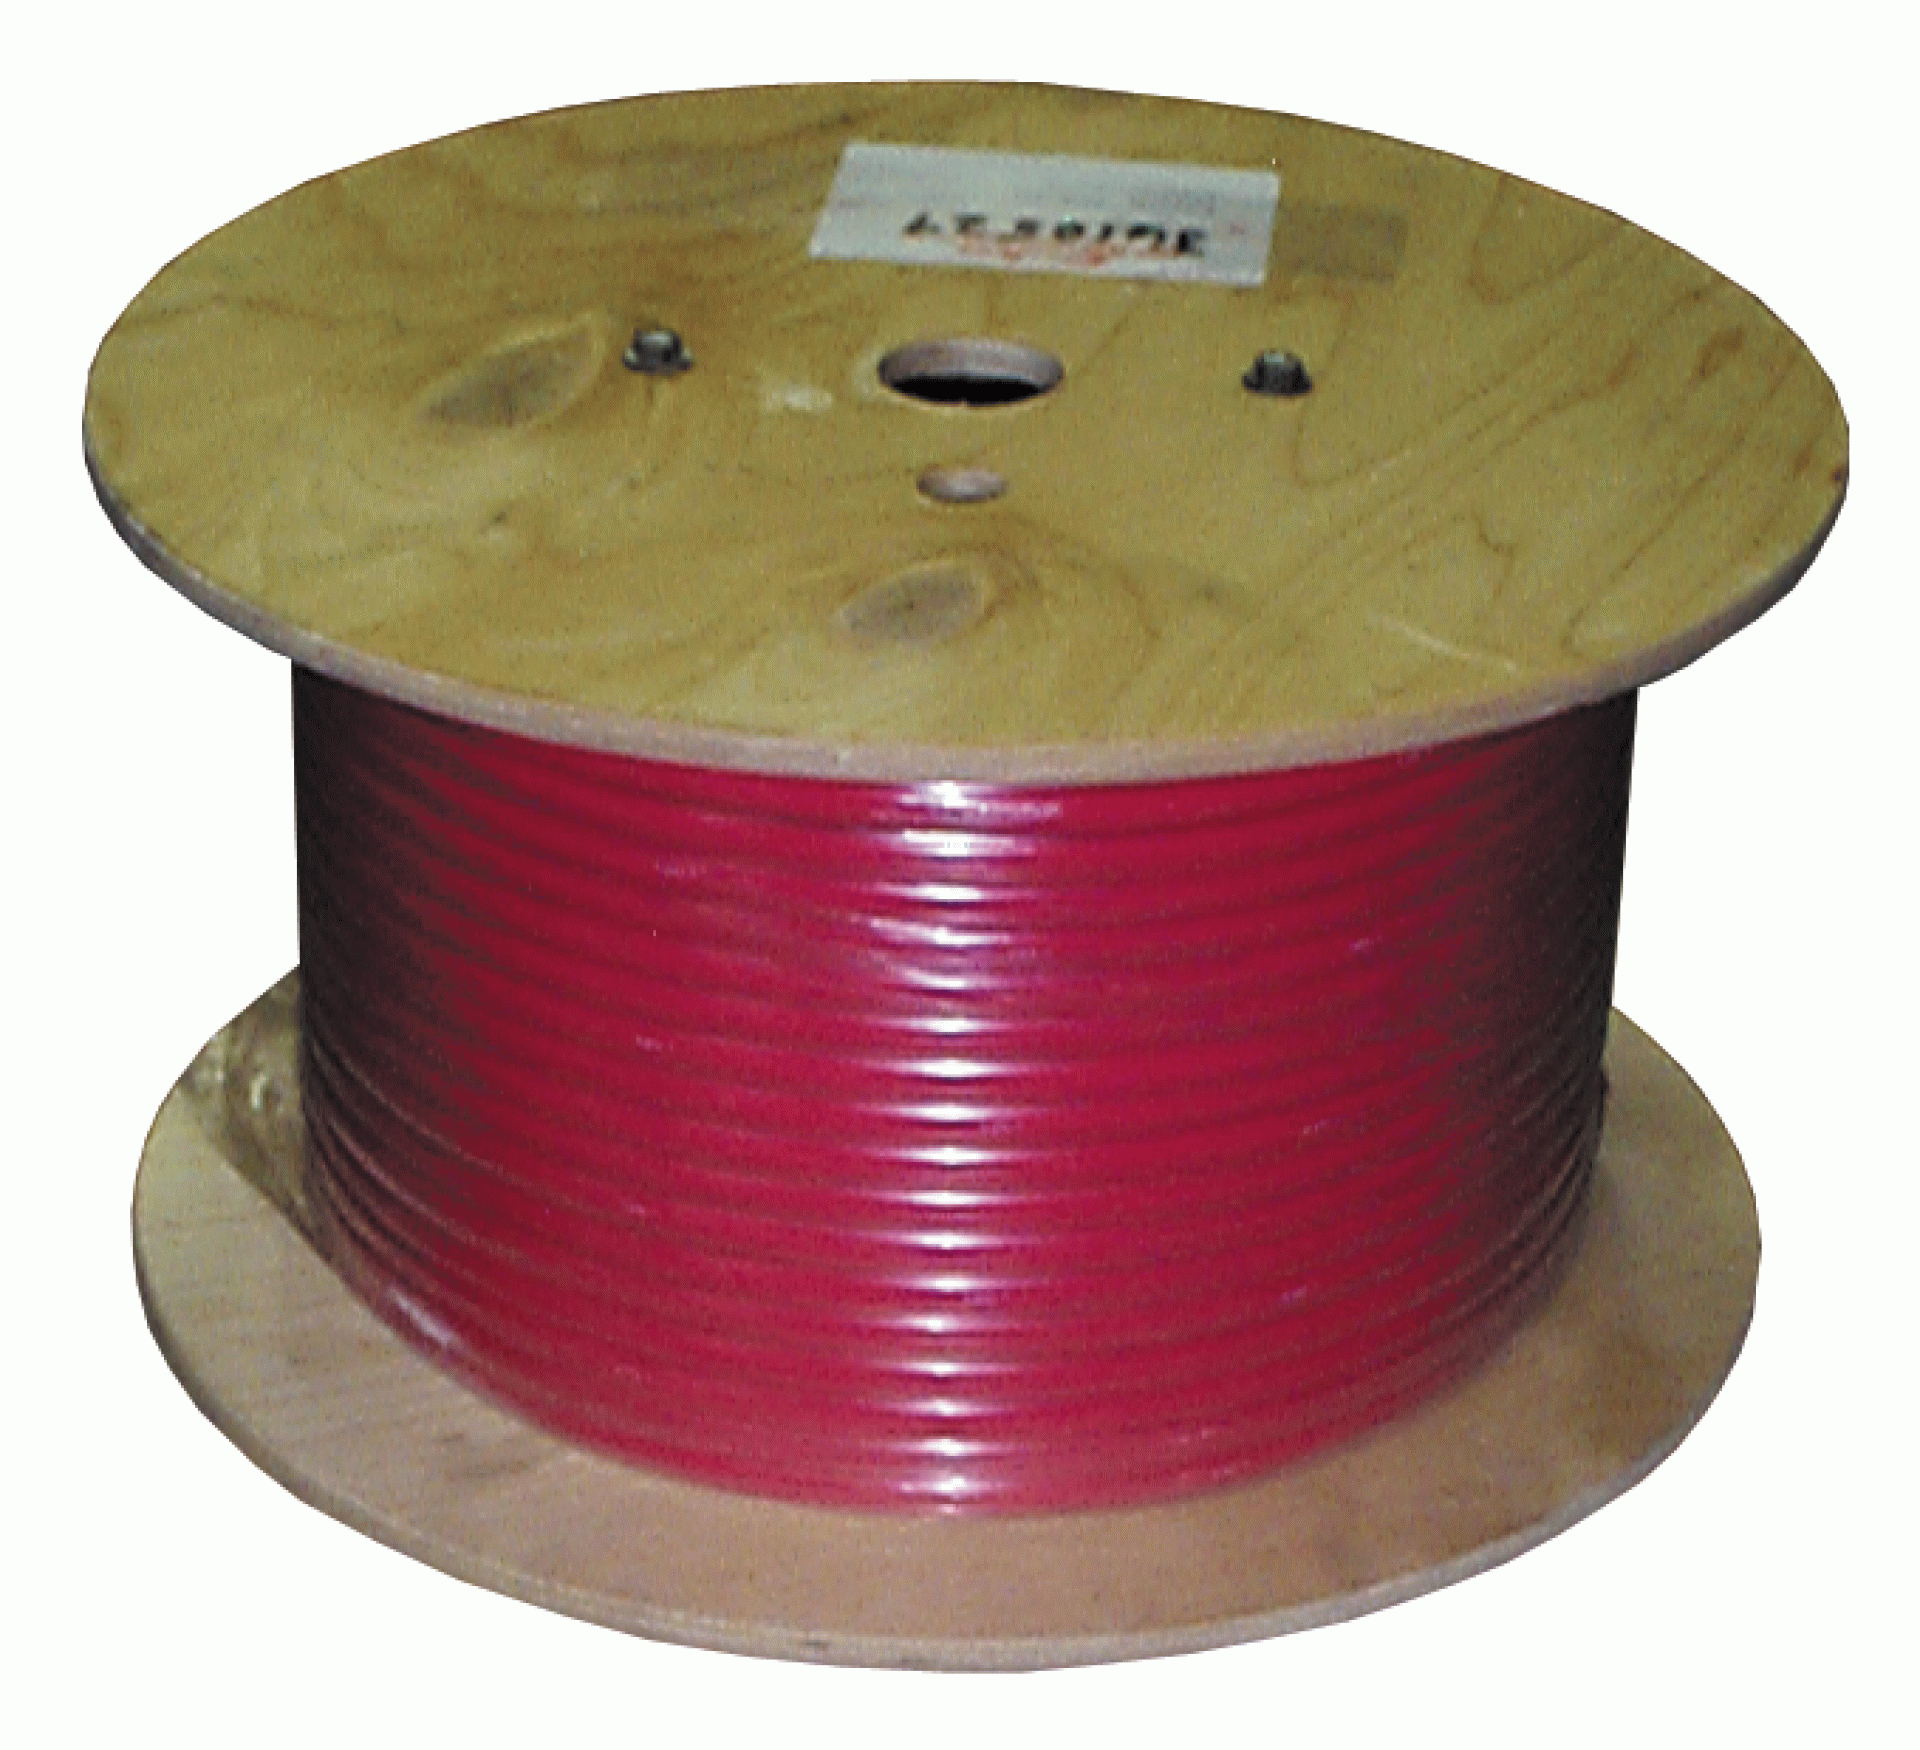 DEKA | 03219 | JACKETED BRAKE WIRE - BLACK AND BLUE WITH RED JACKET 500' - 12-2